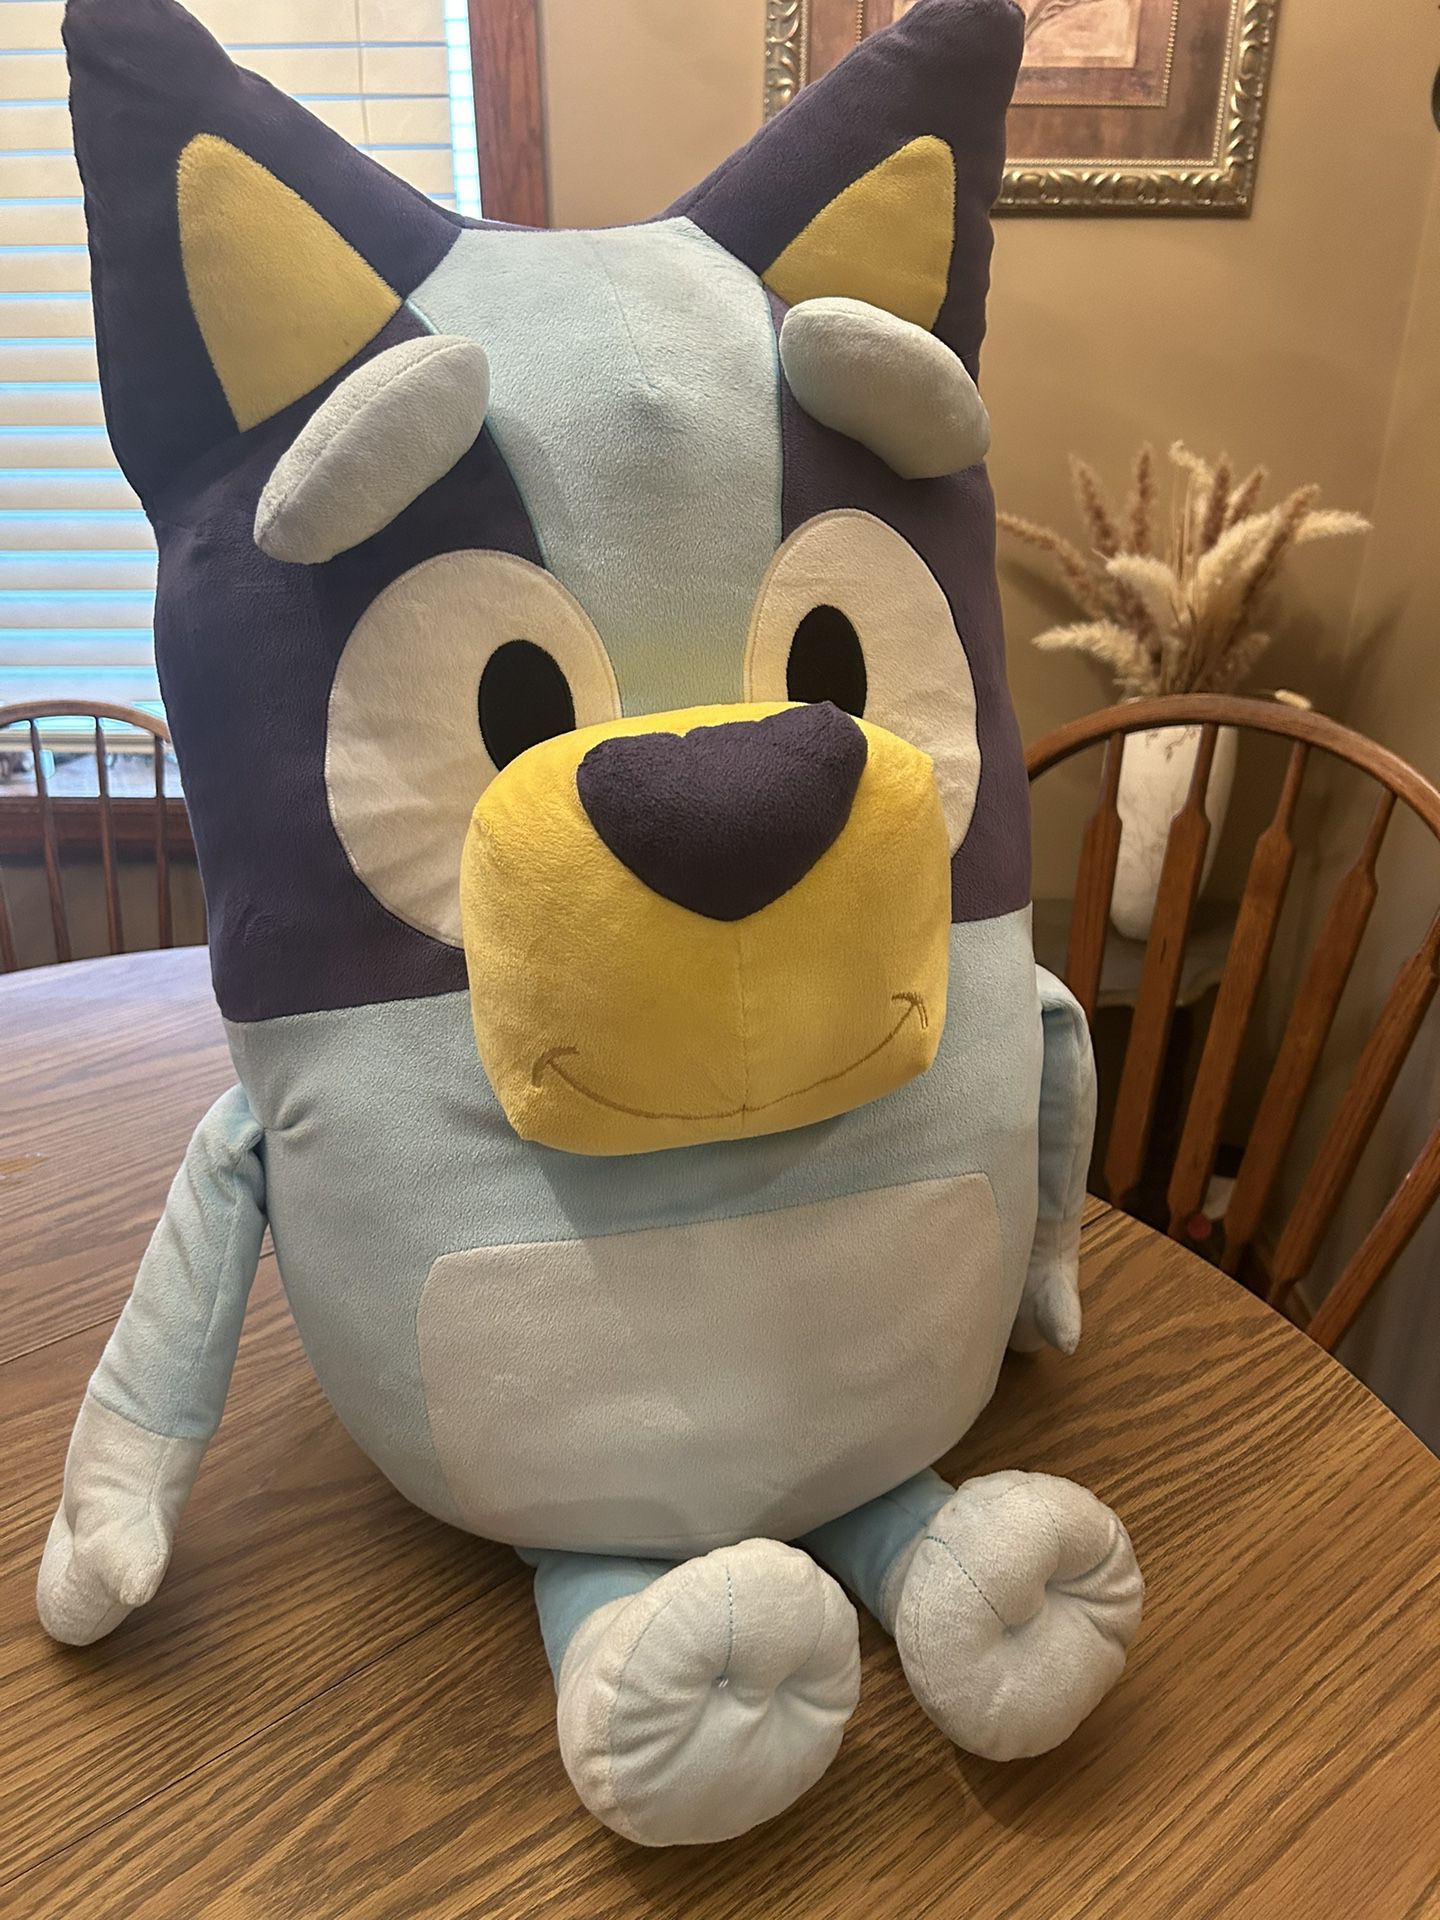 My Size Bluey plush doll - giant approx 32" tall - 